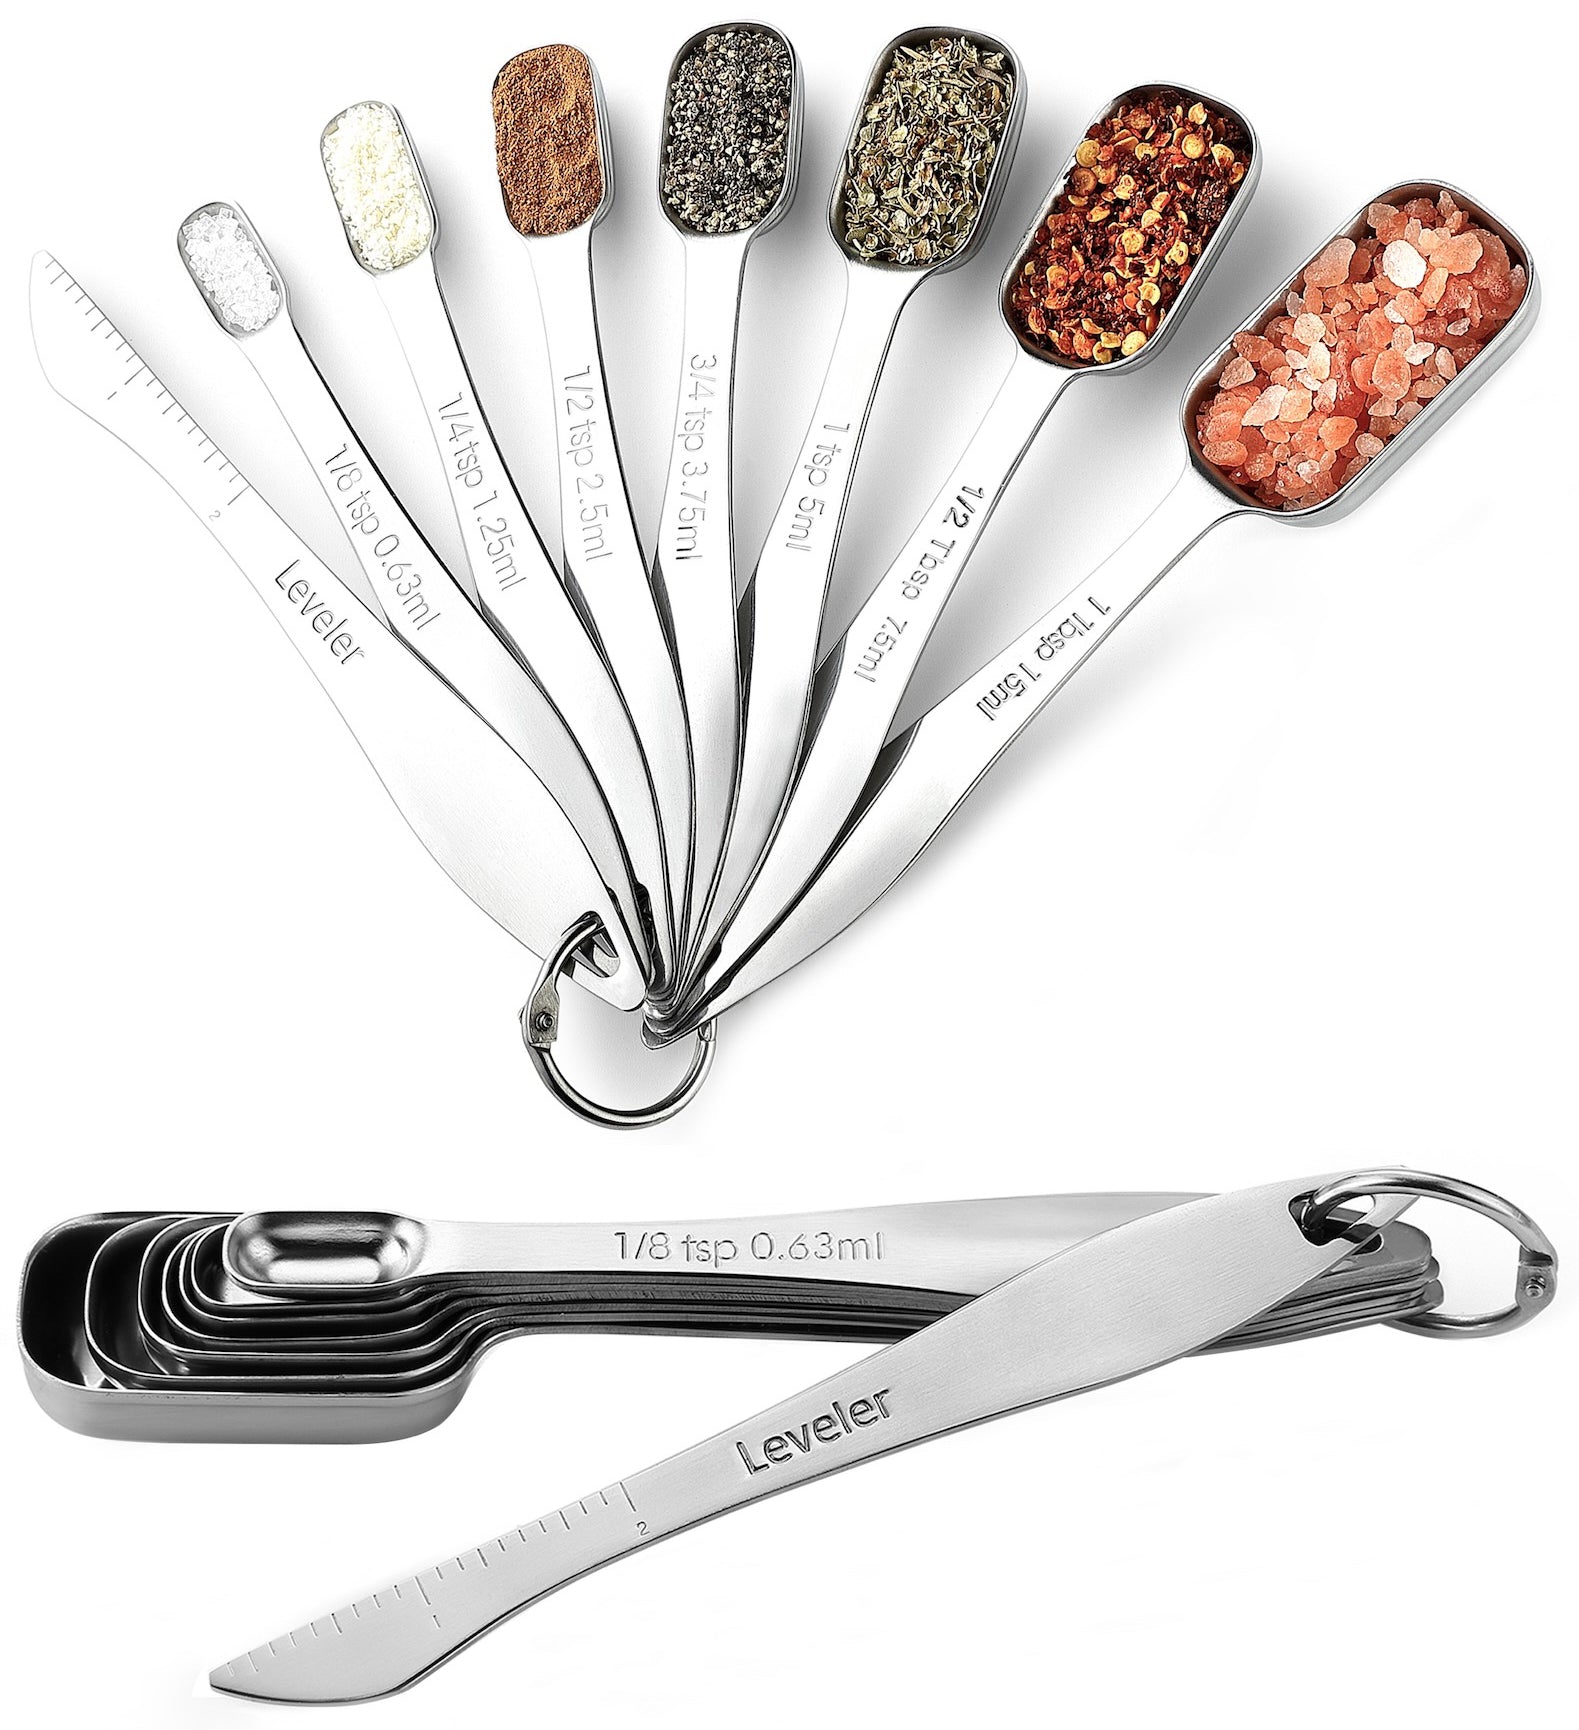 Spring Chef Heavy Duty Stainless Steel Metal Measuring Spoons for Dry or Liquid, Fits in Spice Jar, Set of 6 with Bonus Leveler, Size: Rectangular